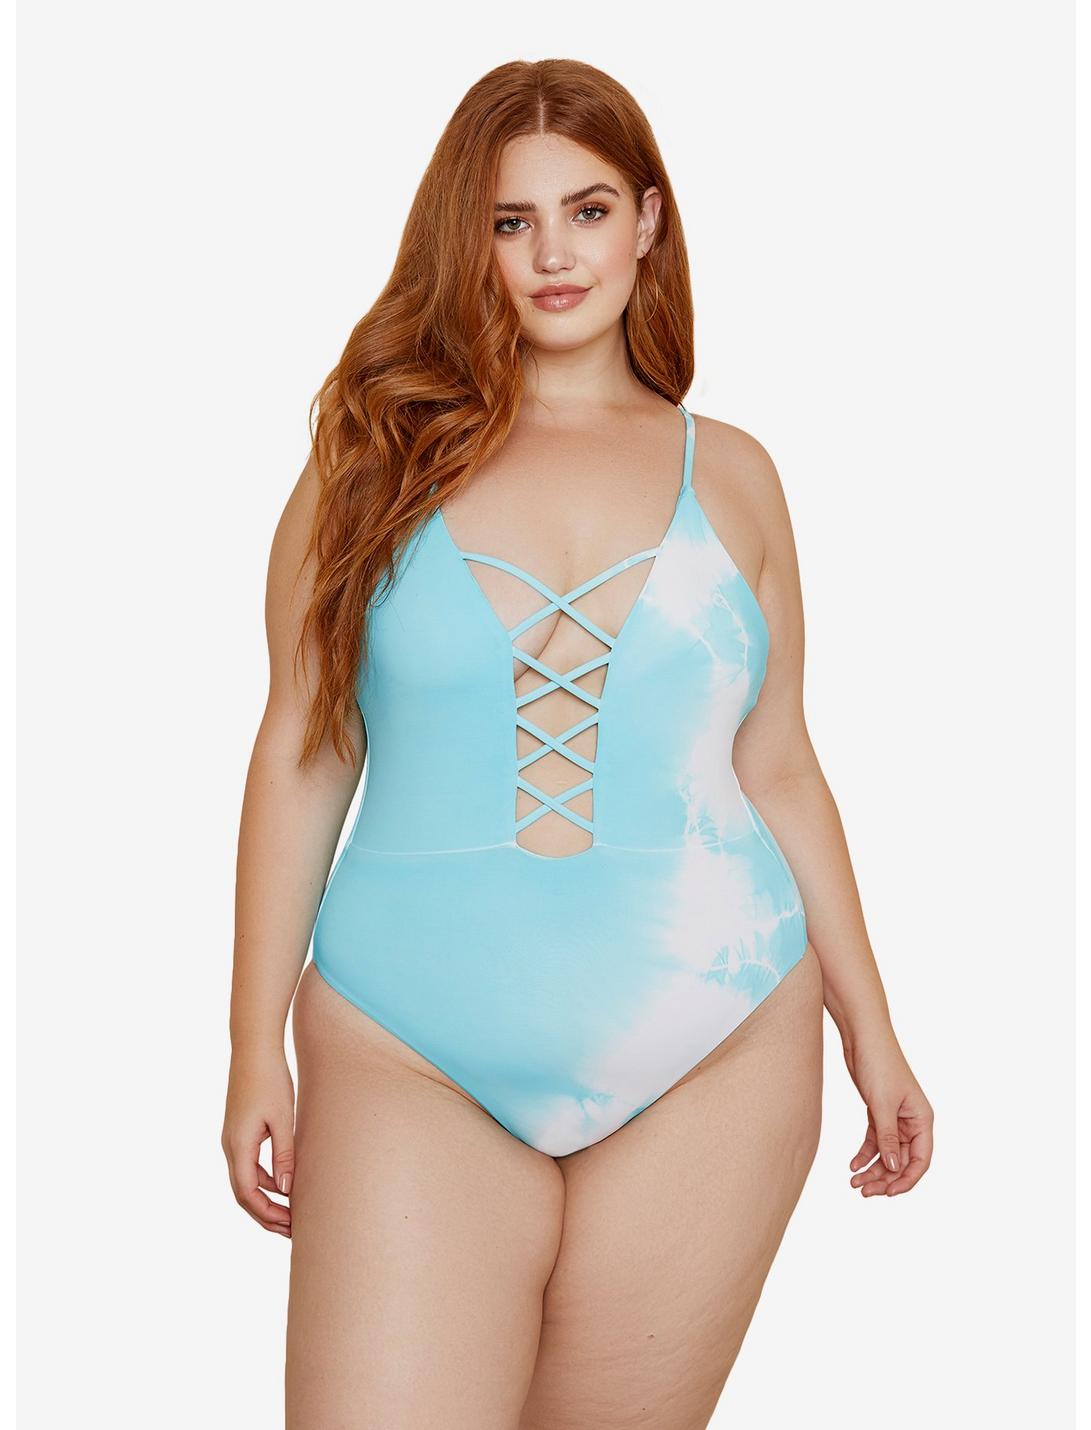 Dippin' Daisy's Bliss Swimsuit Crystal Tie Dye Plus Size, BLUE, hi-res